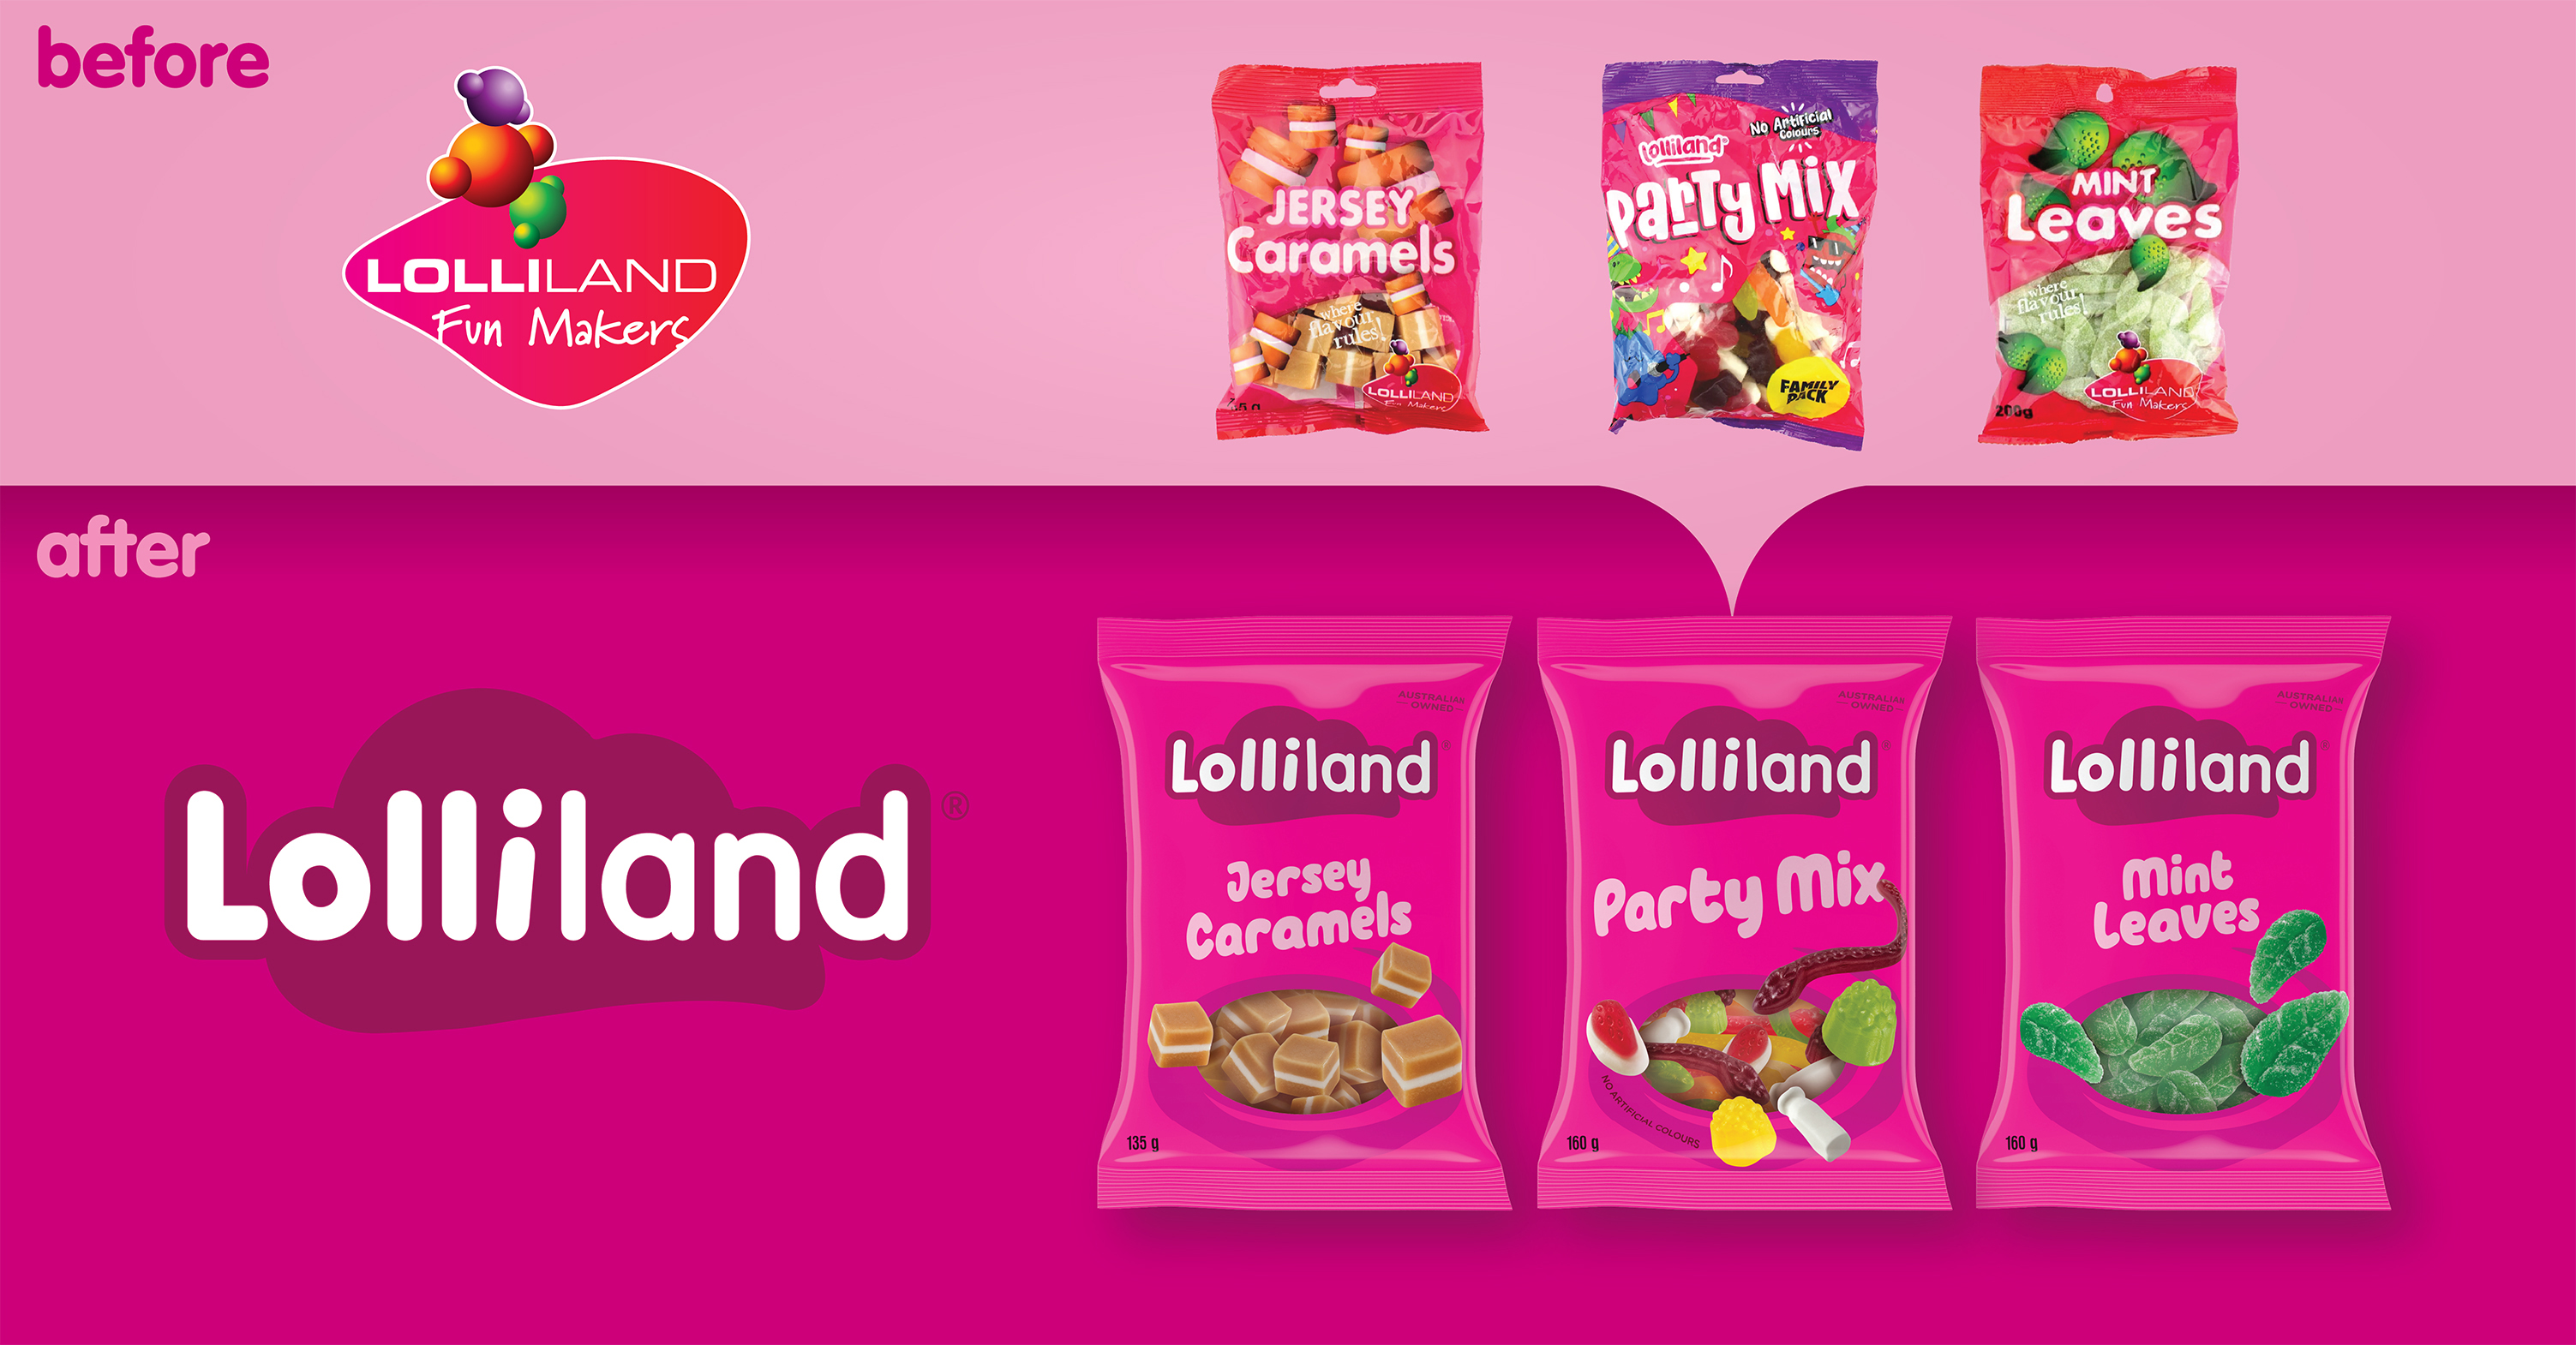 Energi Packaging Design Agency Specialists Creative Inspire Transform Lolliland Confectionery Brand Mark and Packaging Before and After